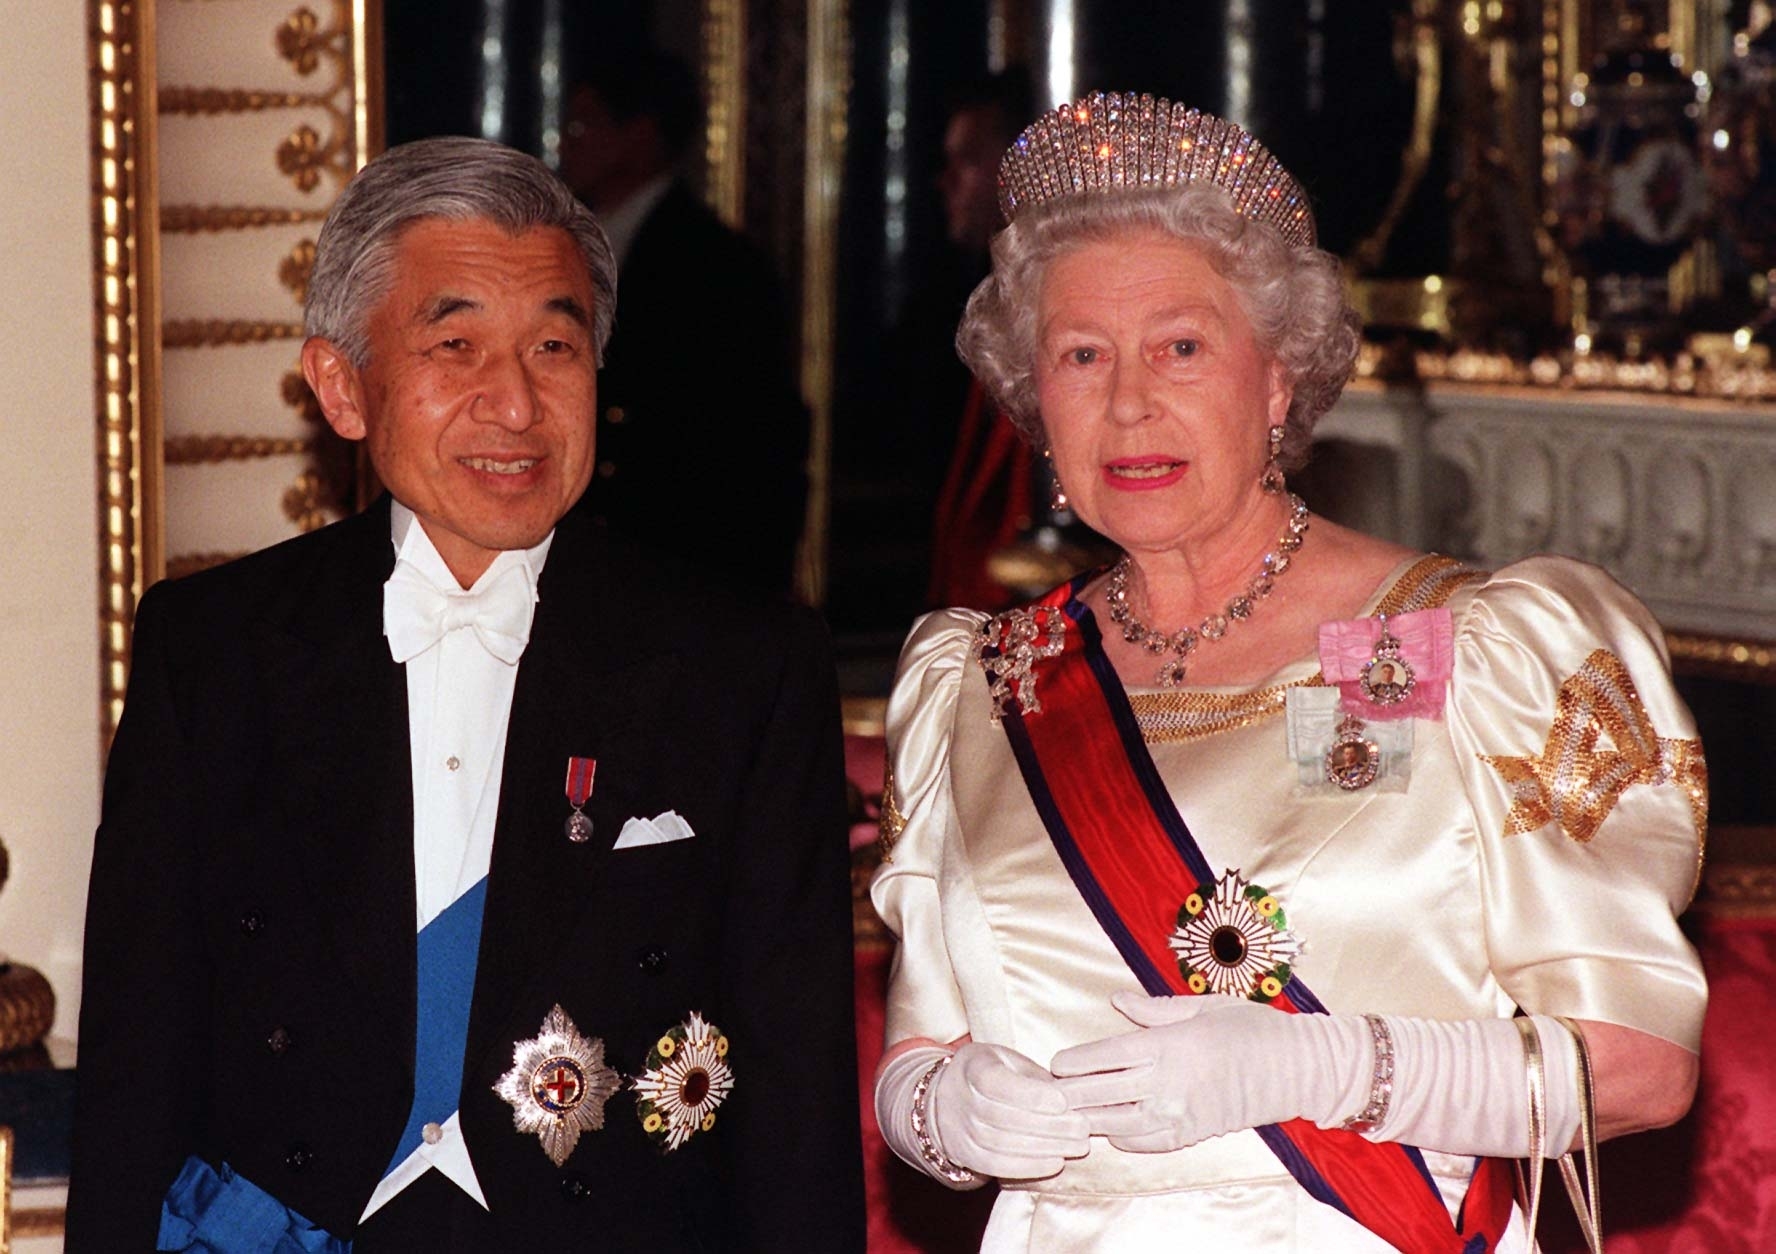 Britain's Queen Elizabeth II accompanies Japanese Emperor Akihito to the State Banquet Hall at Buckingham Palace